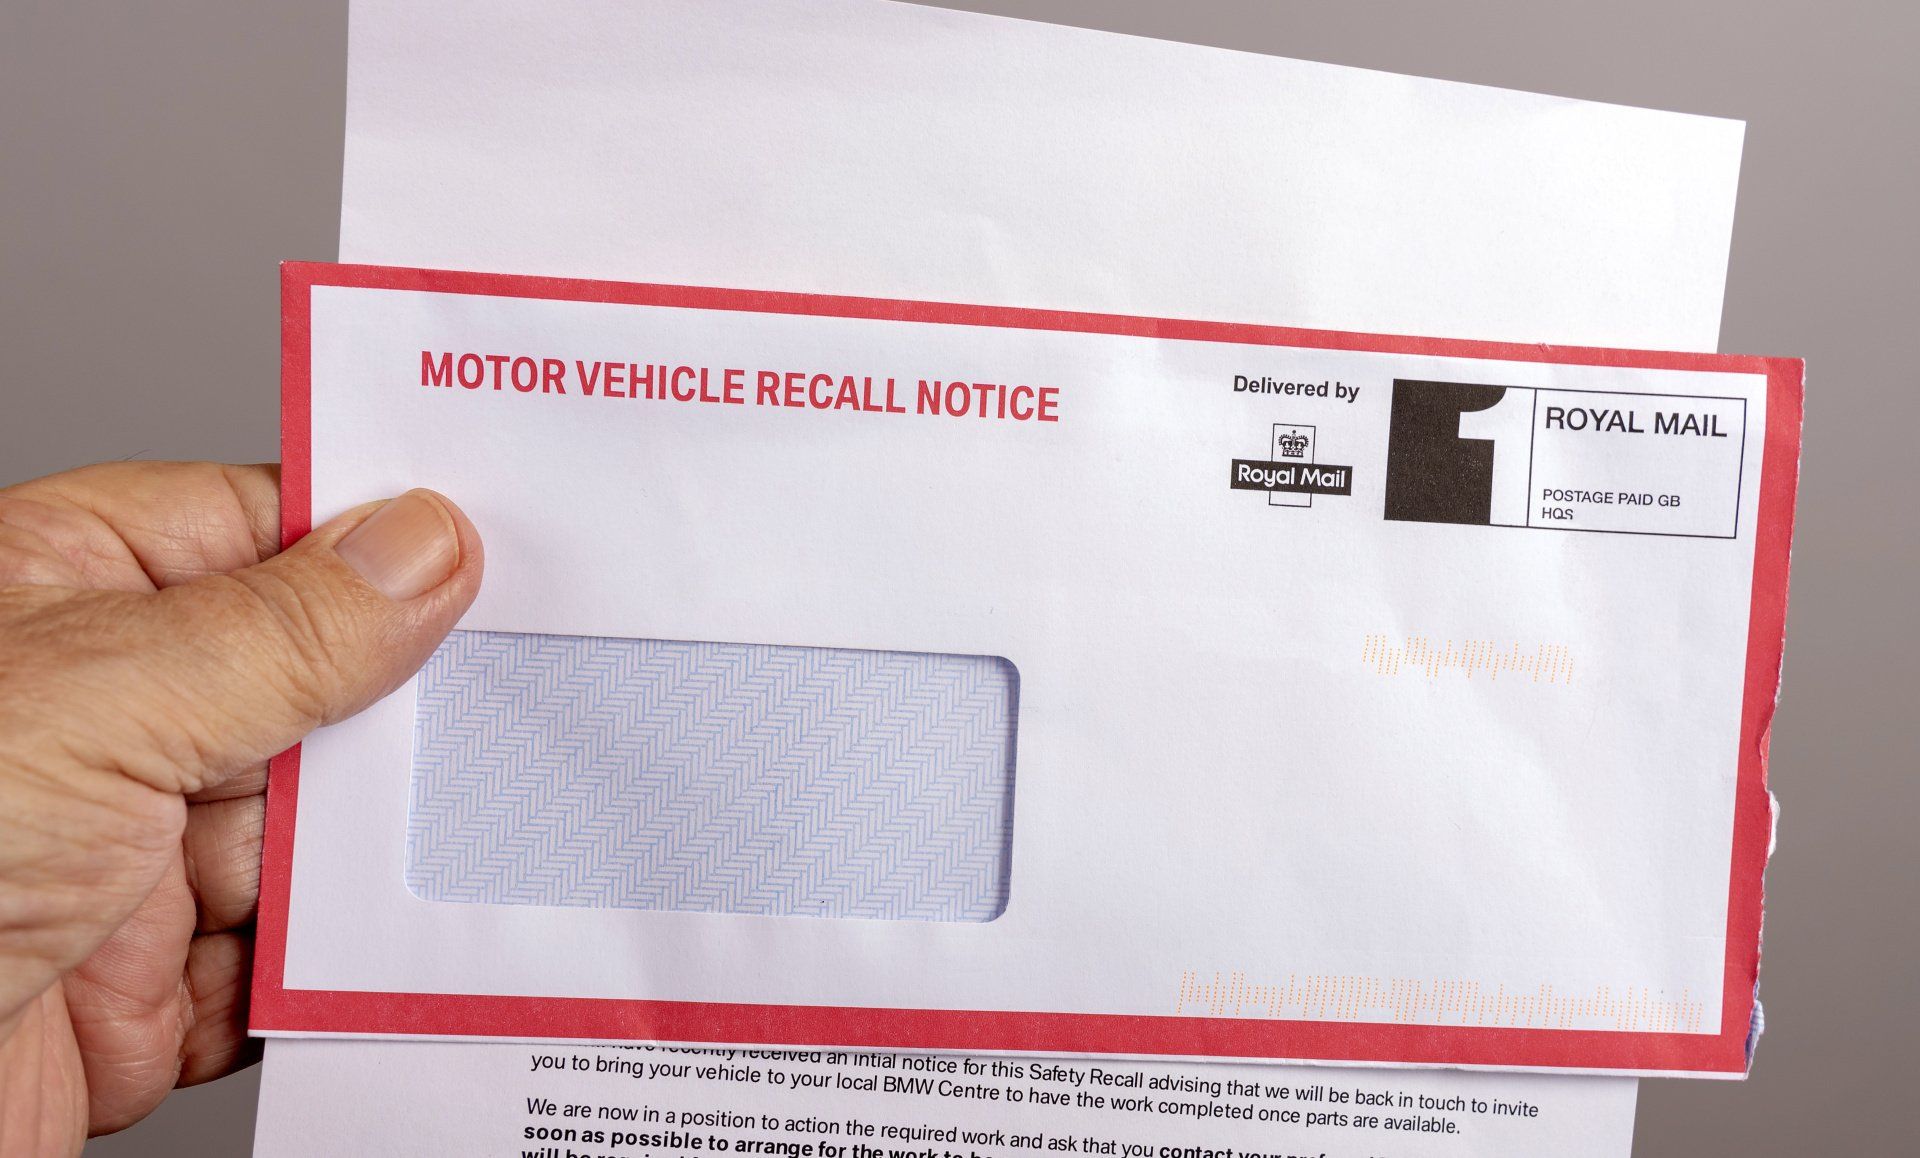 What do you do if you're in an accident caused by recalled components?